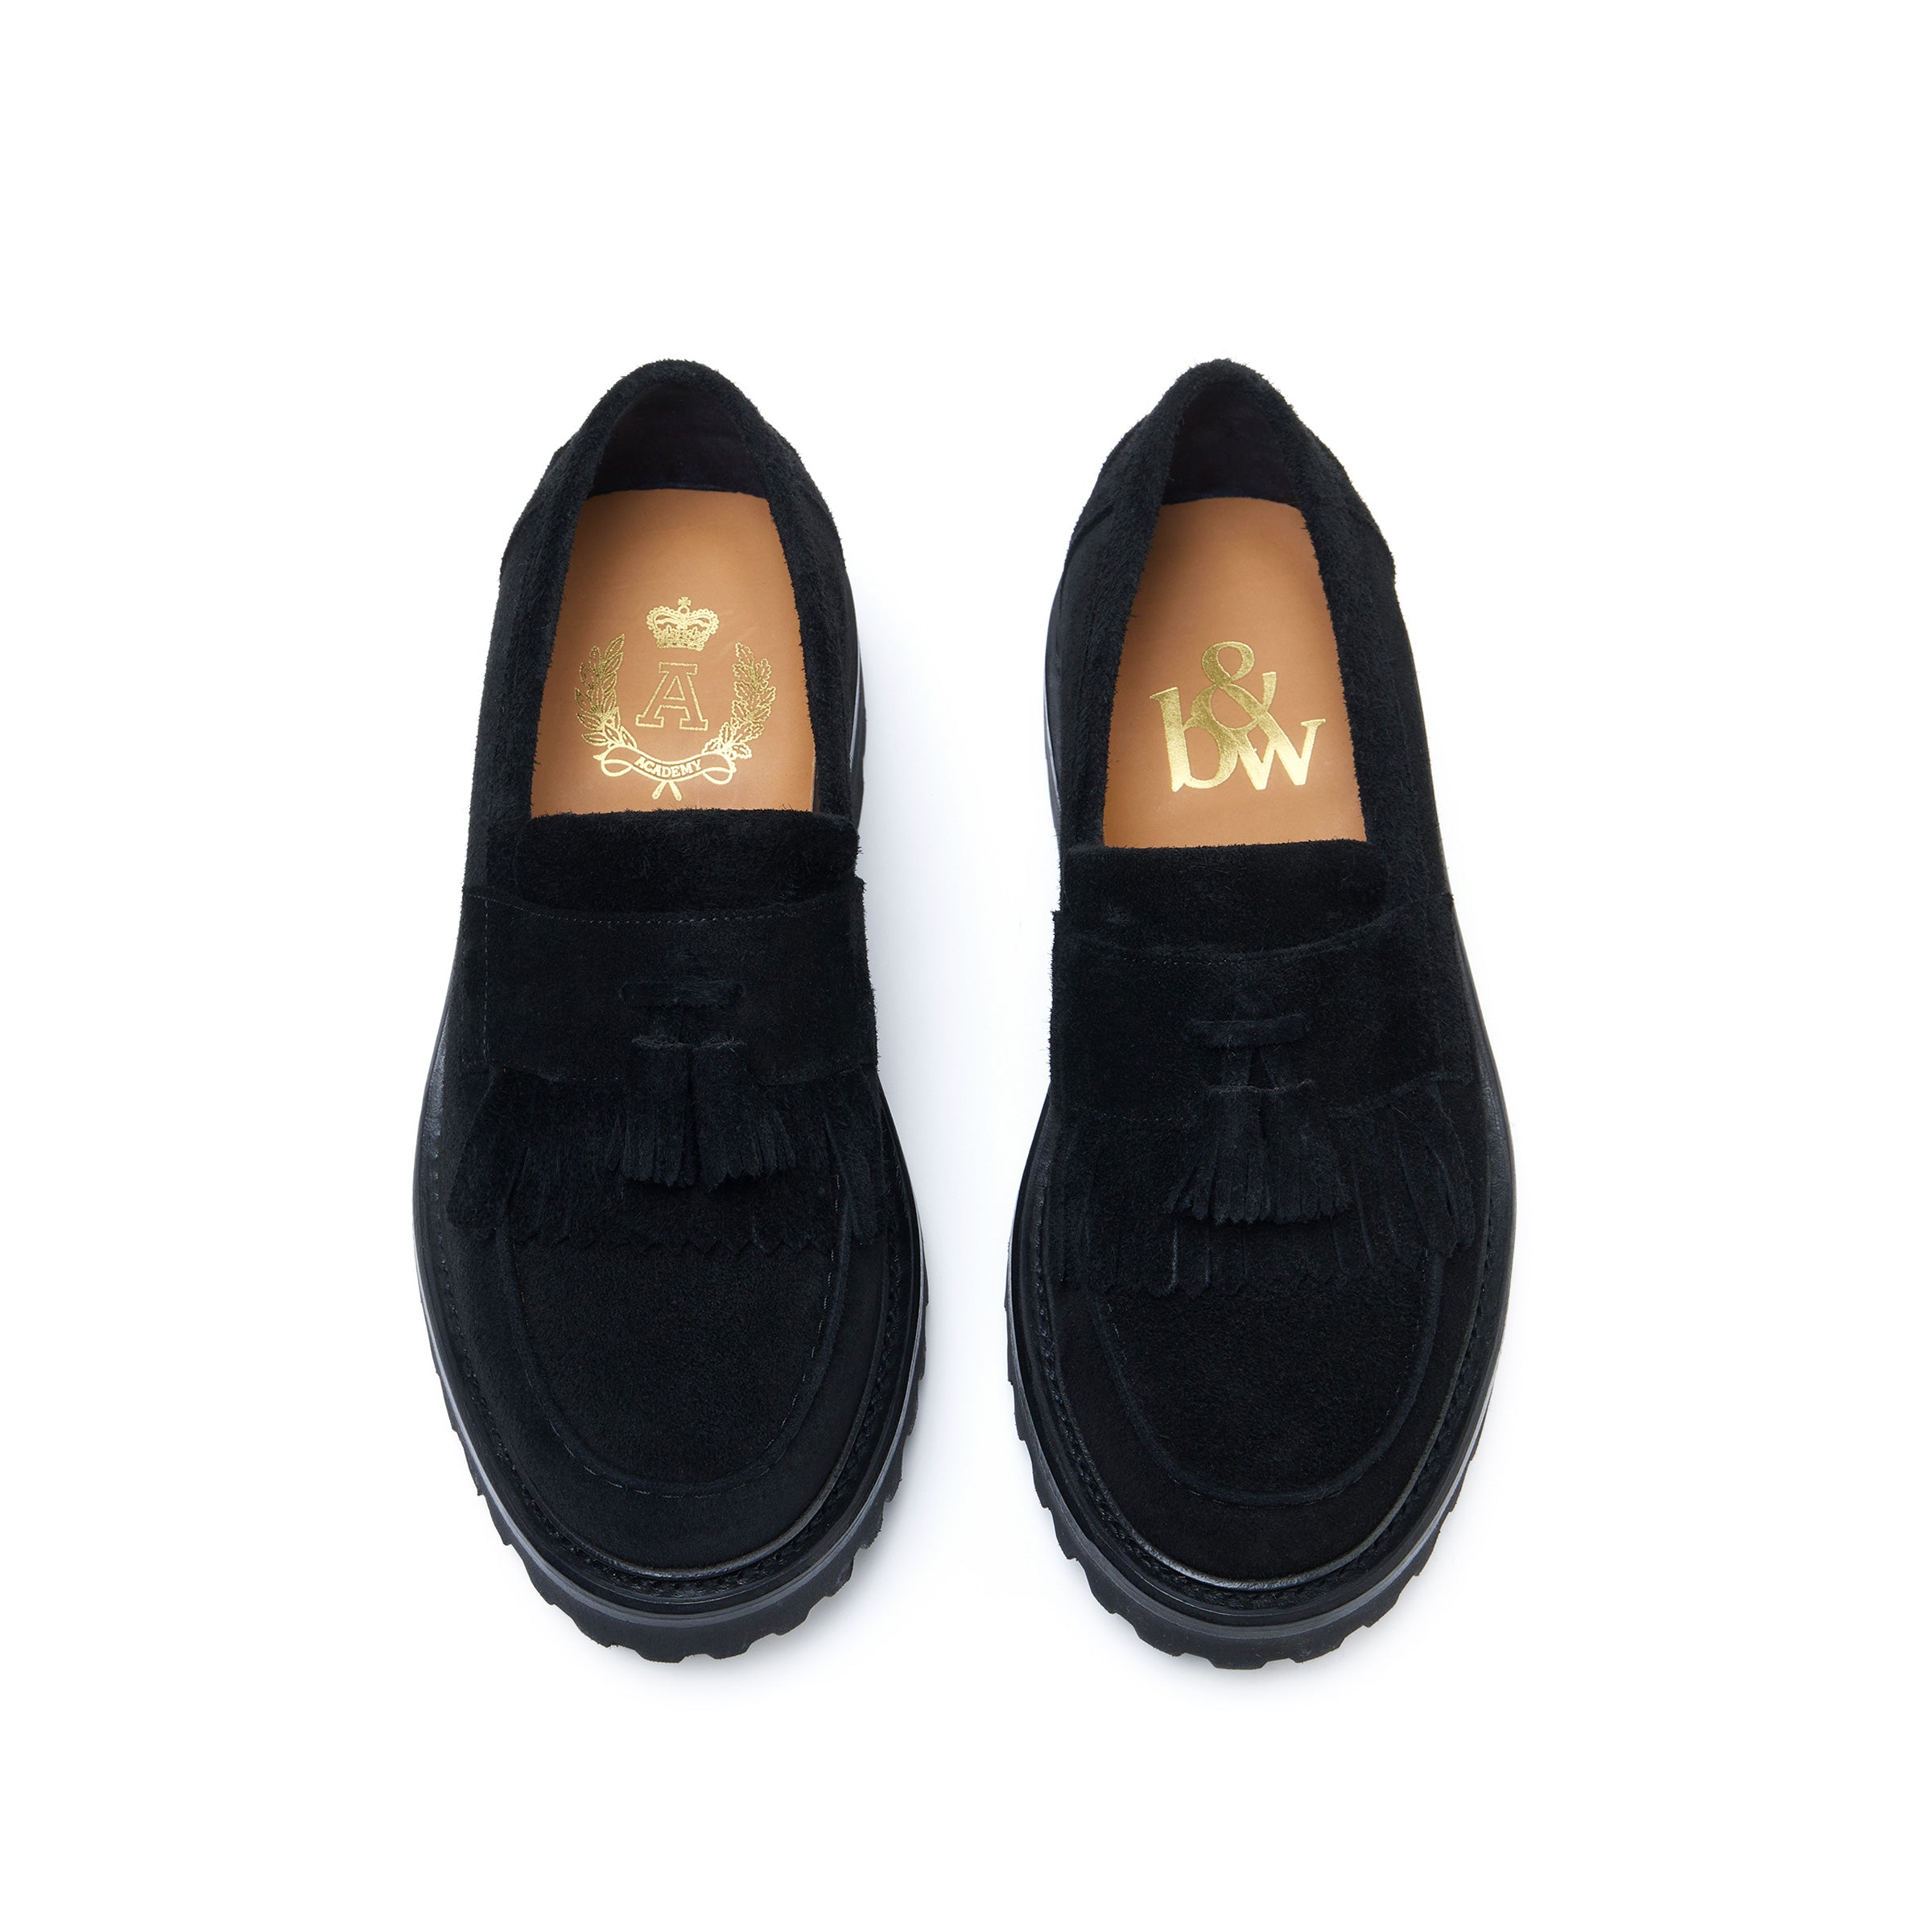 The Kiltie Loafer Exclusively for Academy, Midnight